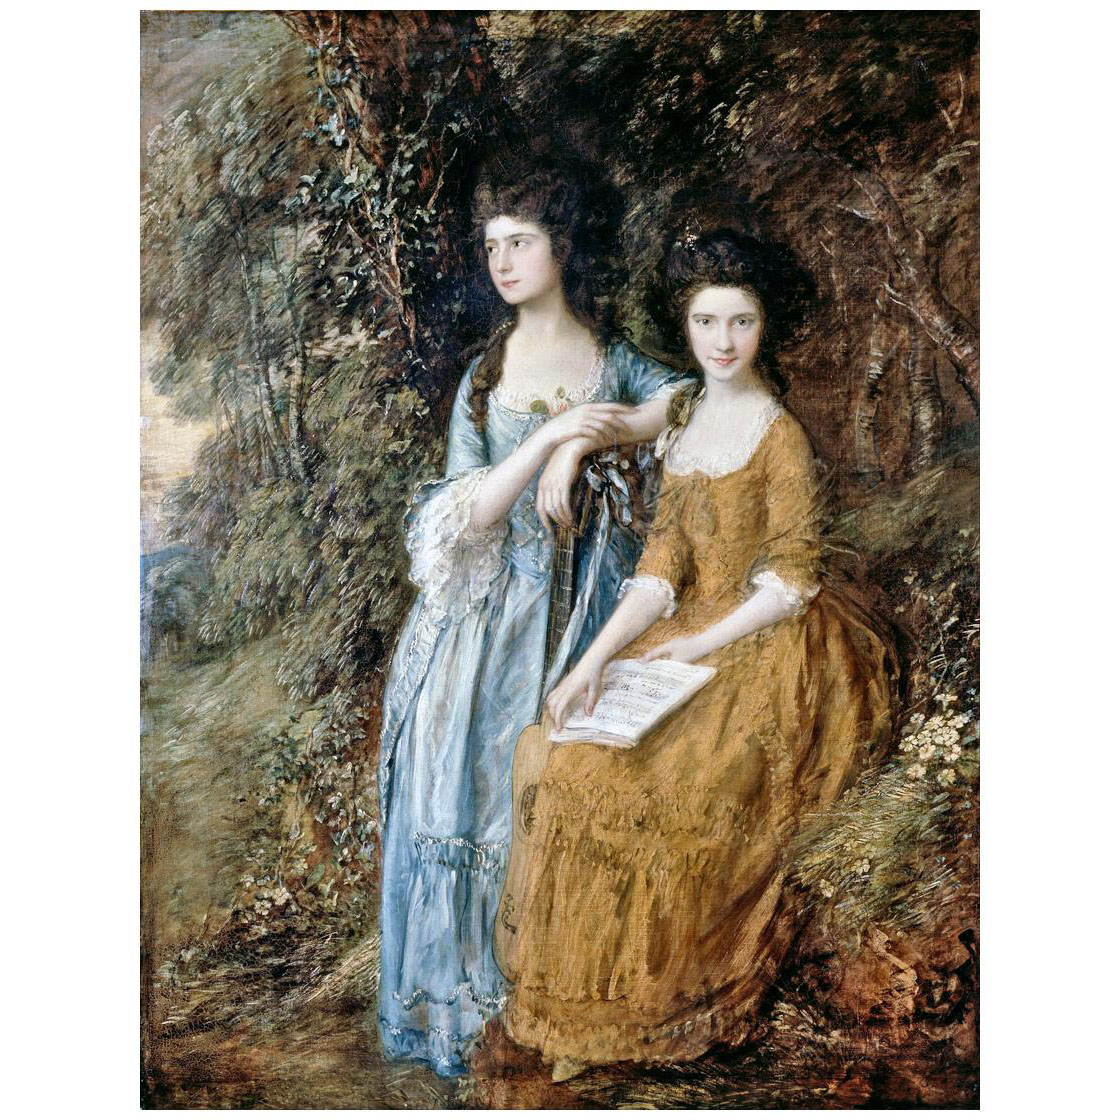 Thomas Gainsborough. Elizabeth and Mary Linley. 1772. Dulwich Picture Gallery